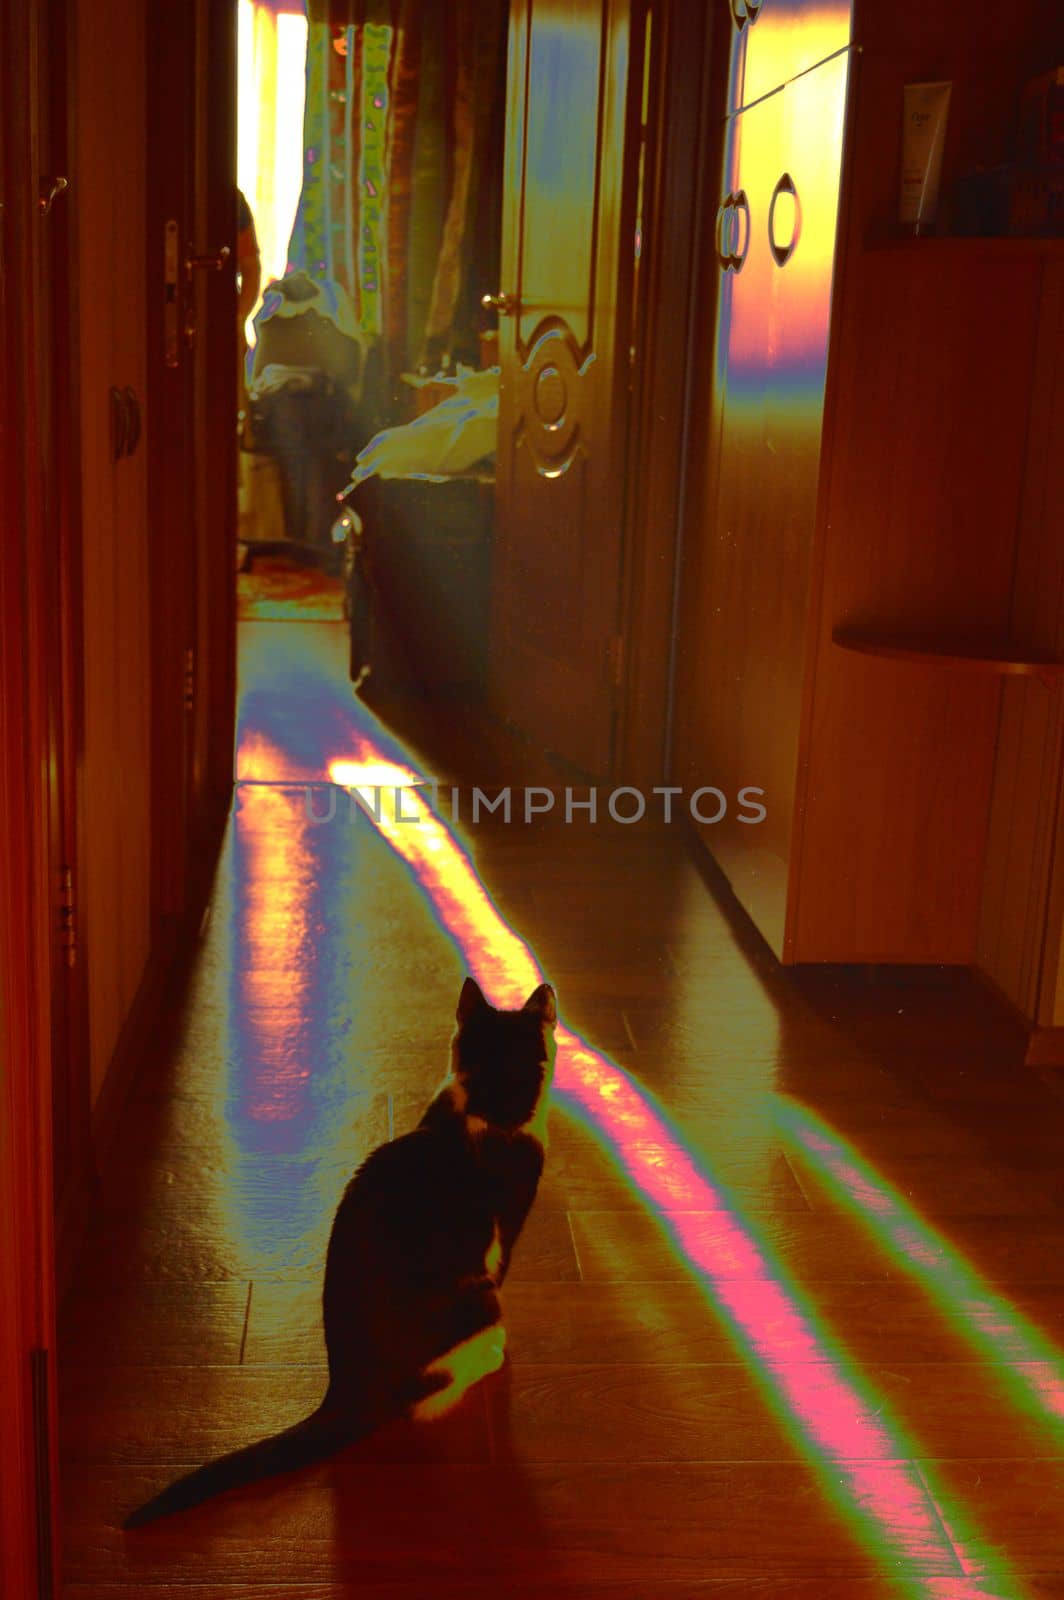 black cat sitting in morning light, fantasy photo processing, rainbow pattern by claire_lucia